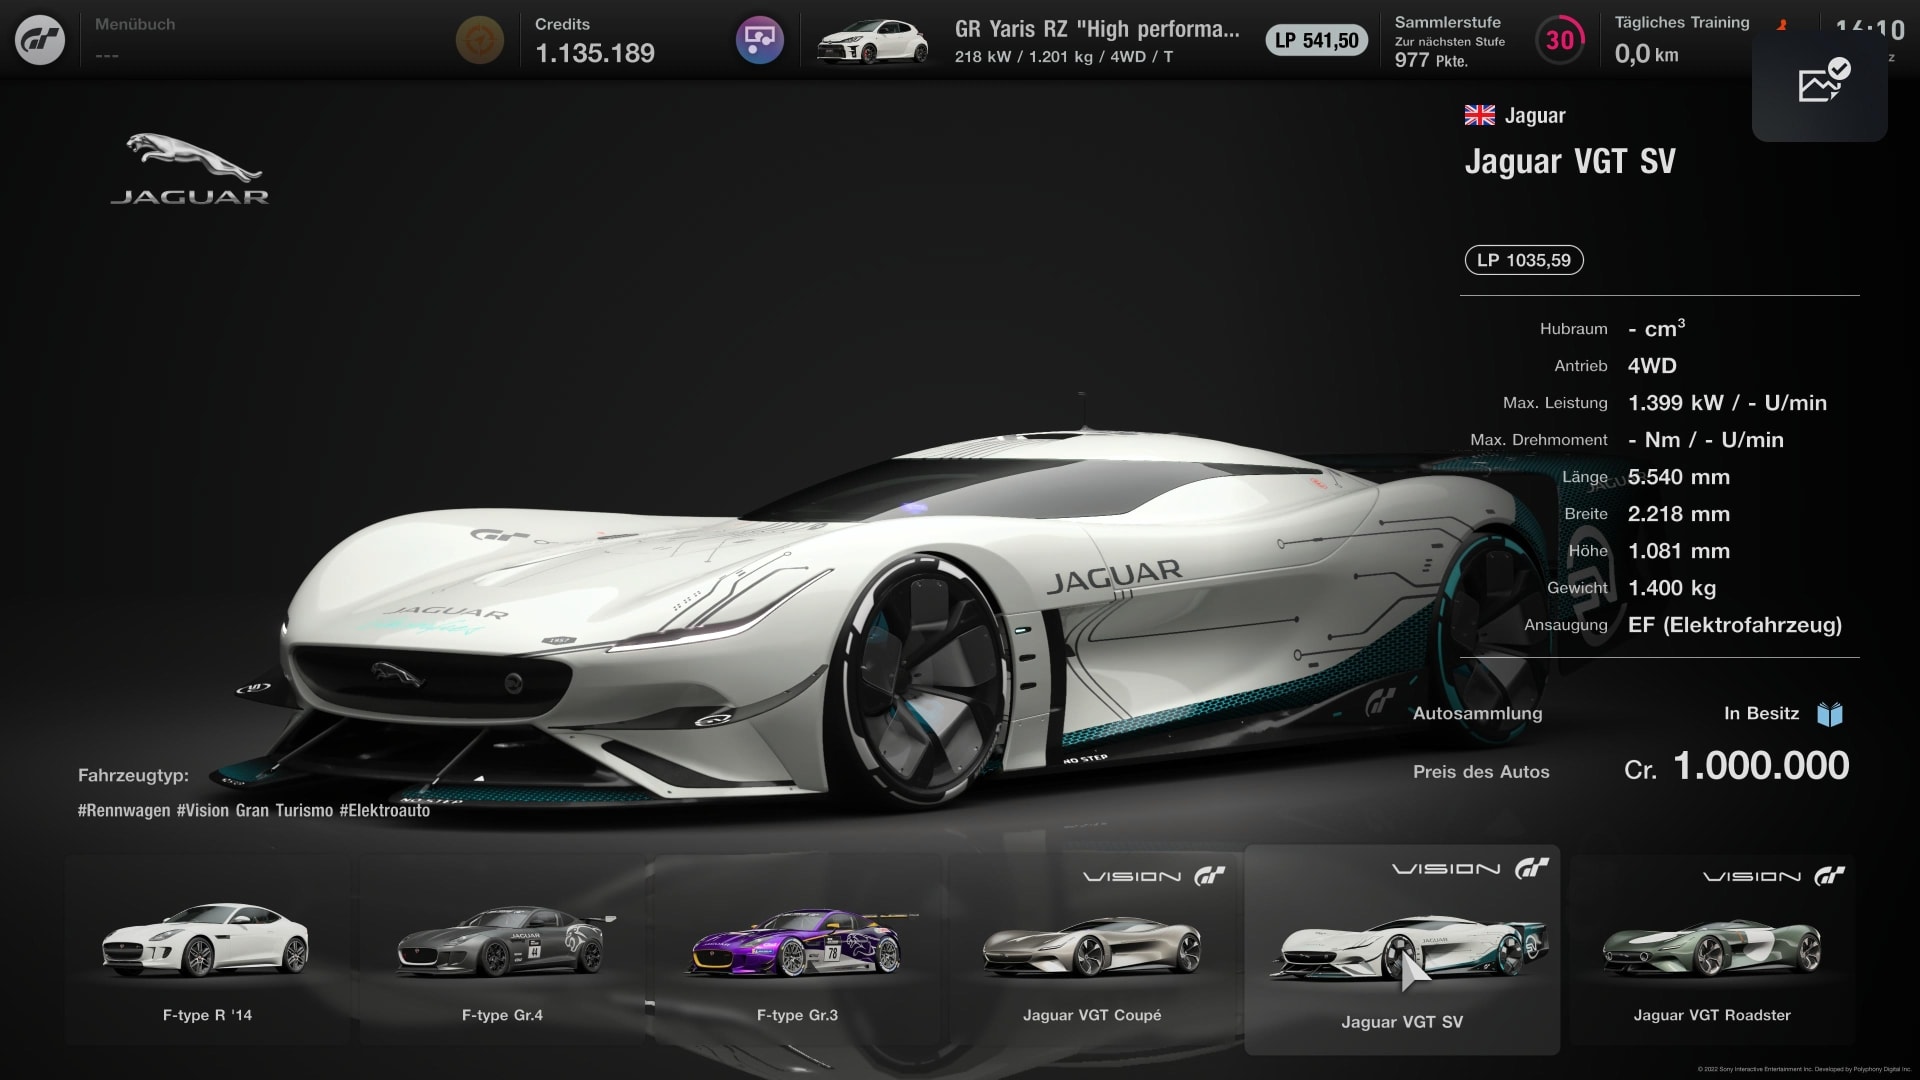 Gran Turismo 7: all editions of the game and their prices